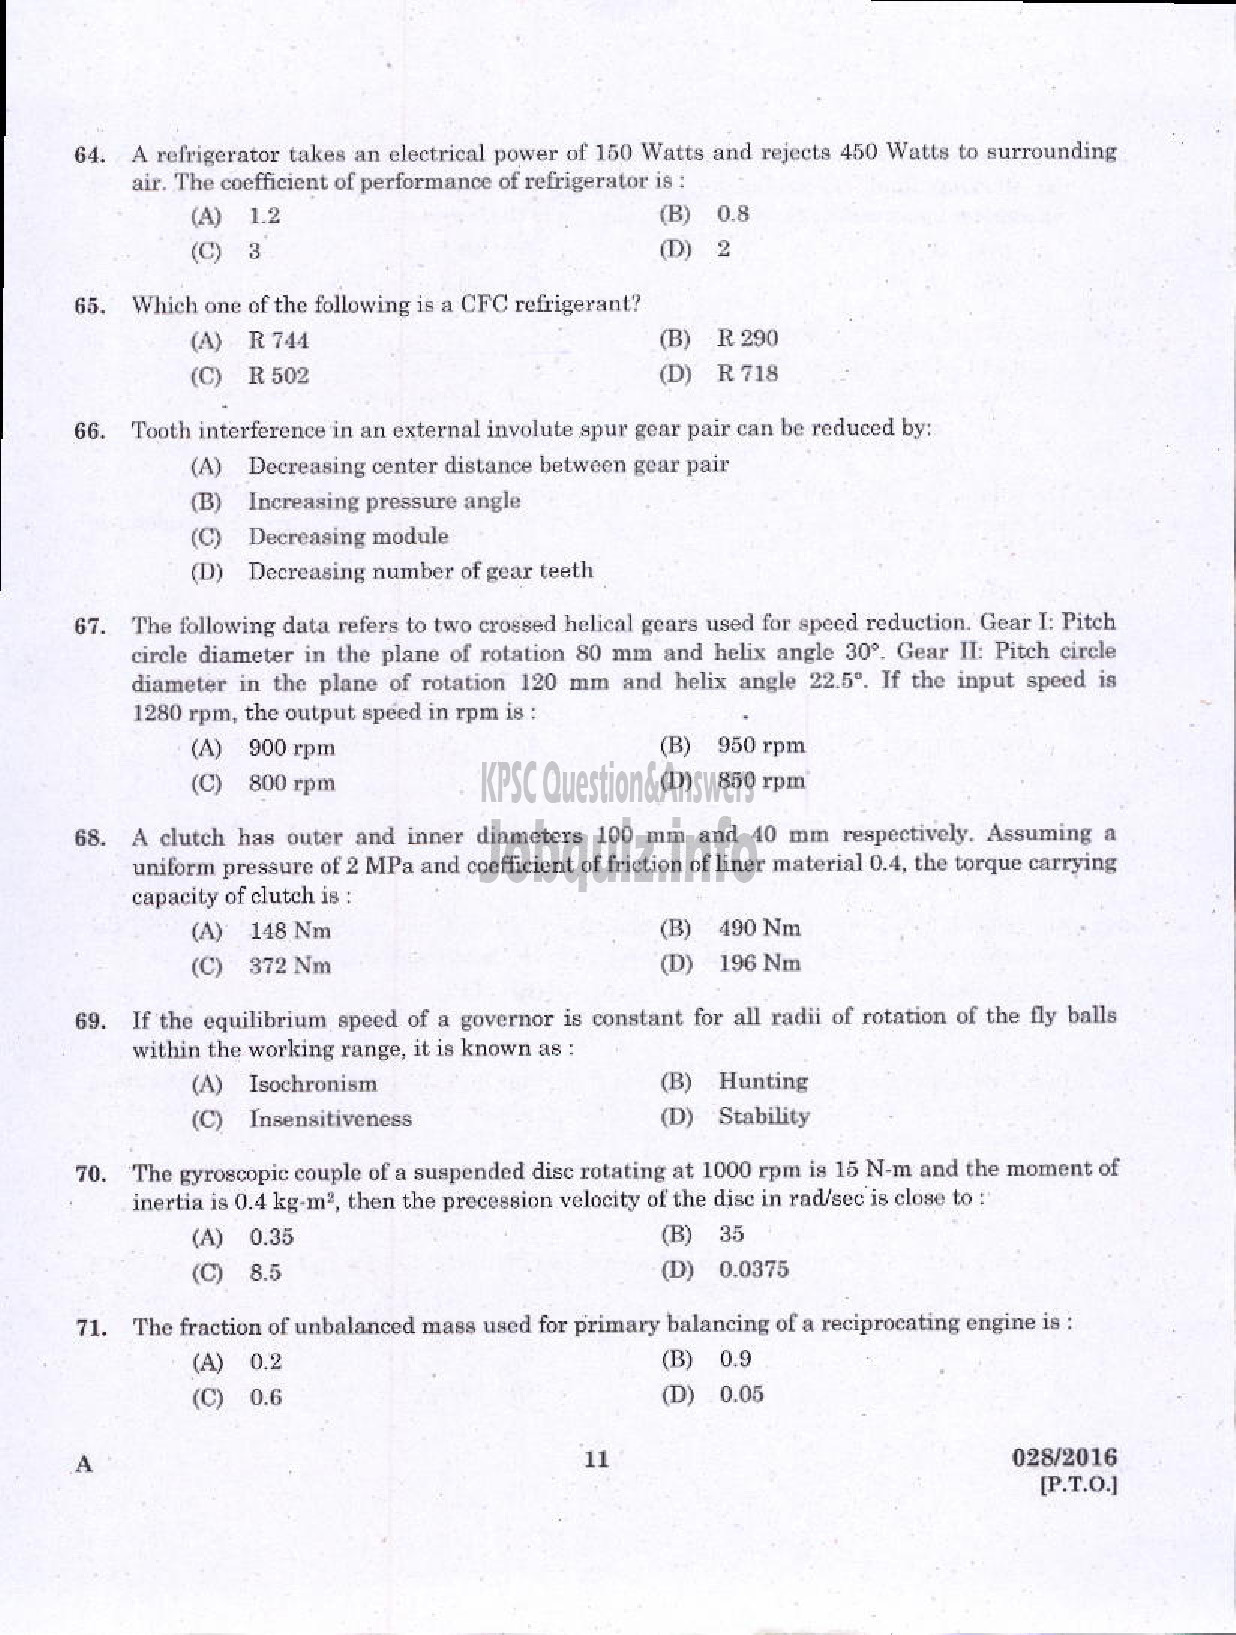 Kerala PSC Question Paper - ASSISTANT ENGINEER DIRECT/BY TRANSFER KERALA WATER AUTHORITY-9